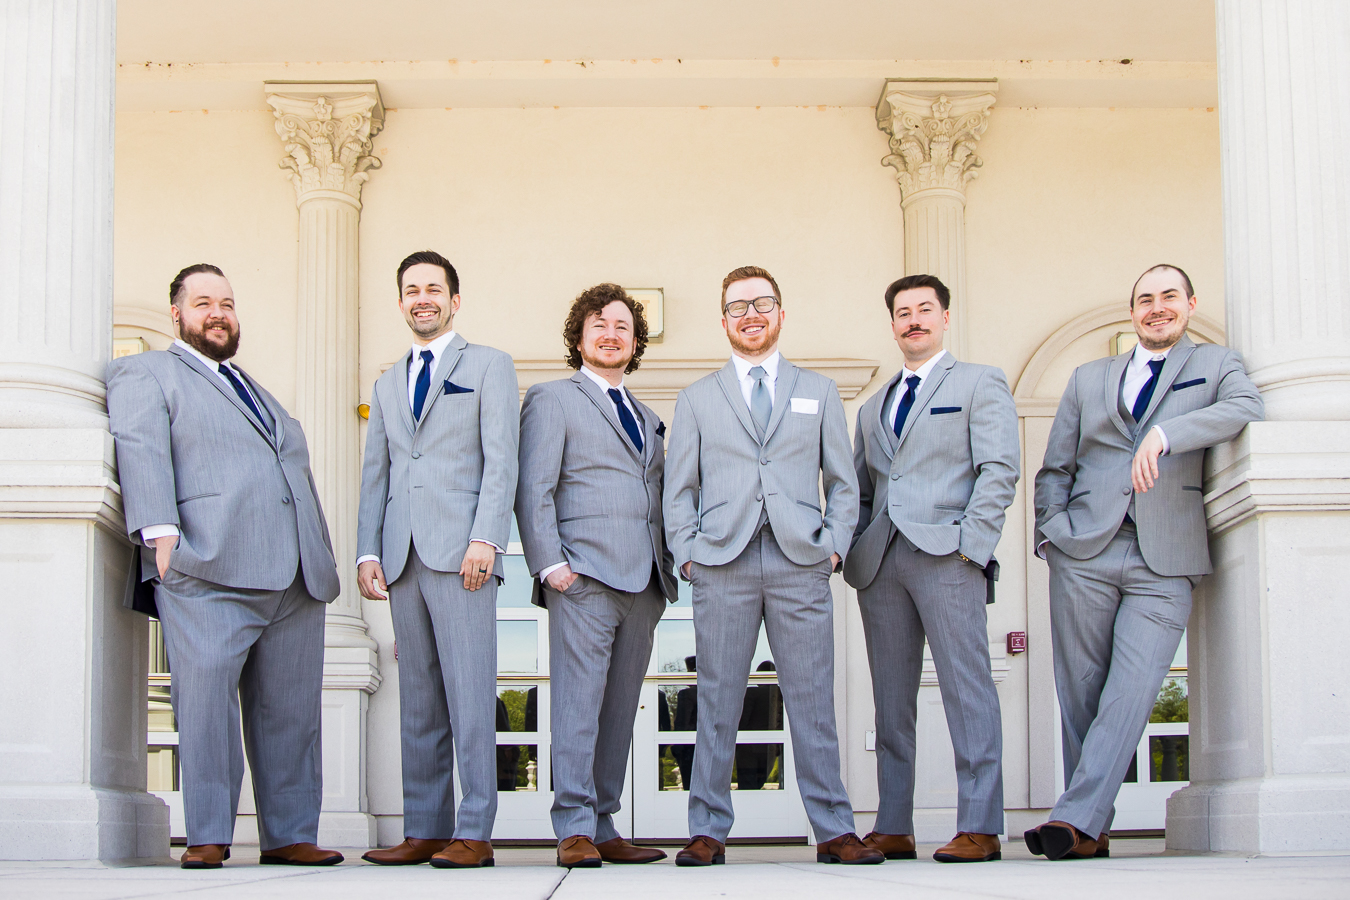 palace at somerset park wedding photographer, lisa rhinehart, captures this traditional image of the groom with his groomsmen standing outside of the palace before their wedding ceremony in new jersey 